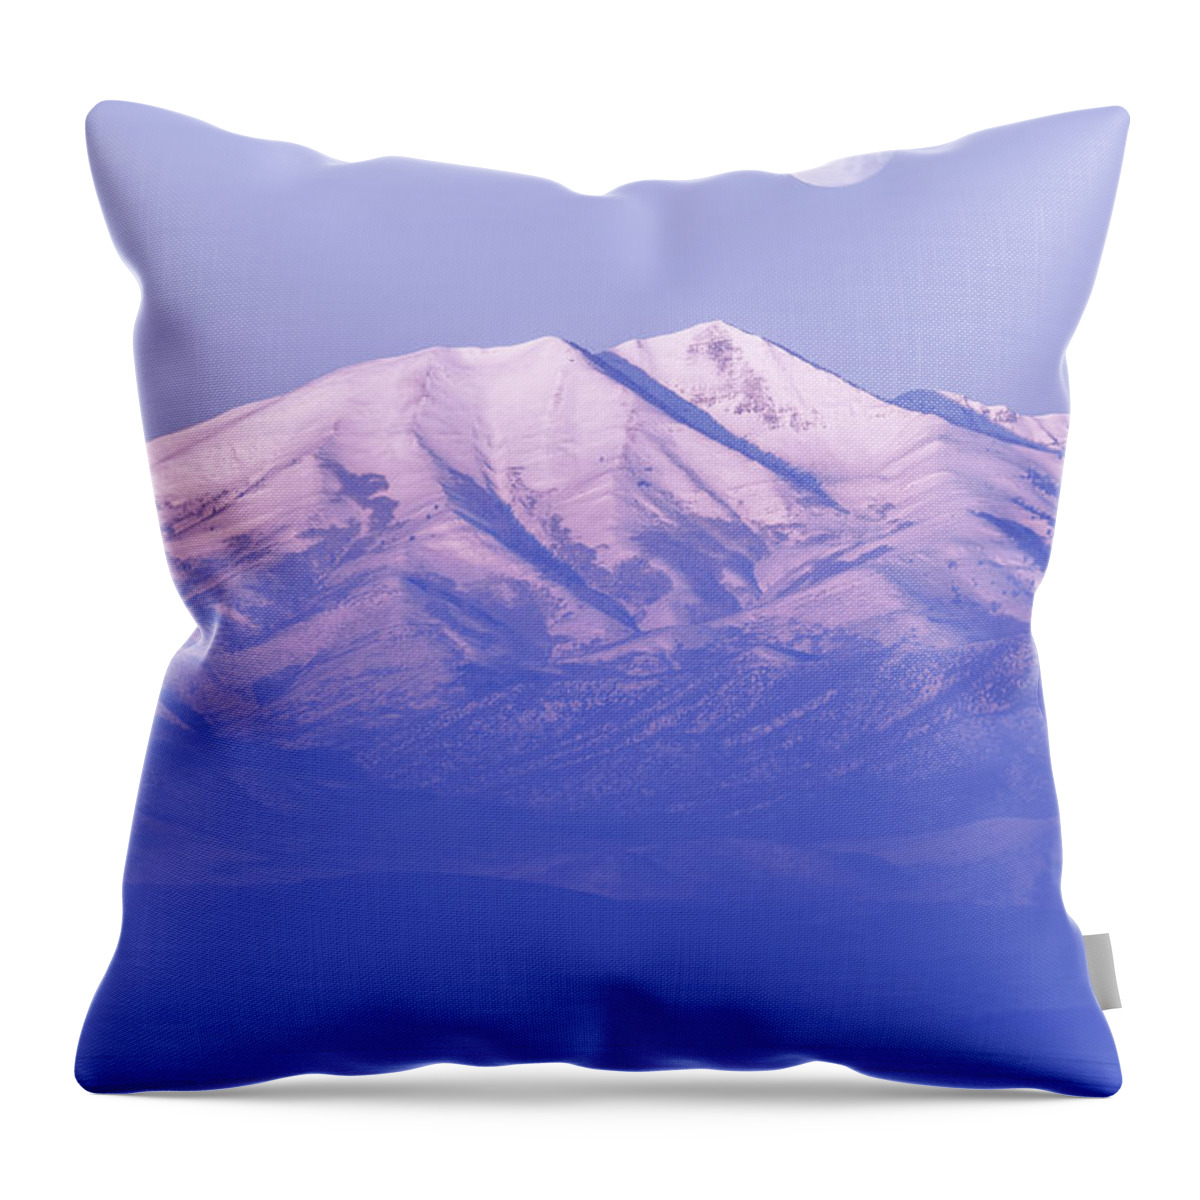 Morning Moon Throw Pillow featuring the photograph Morning Moon by Chad Dutson